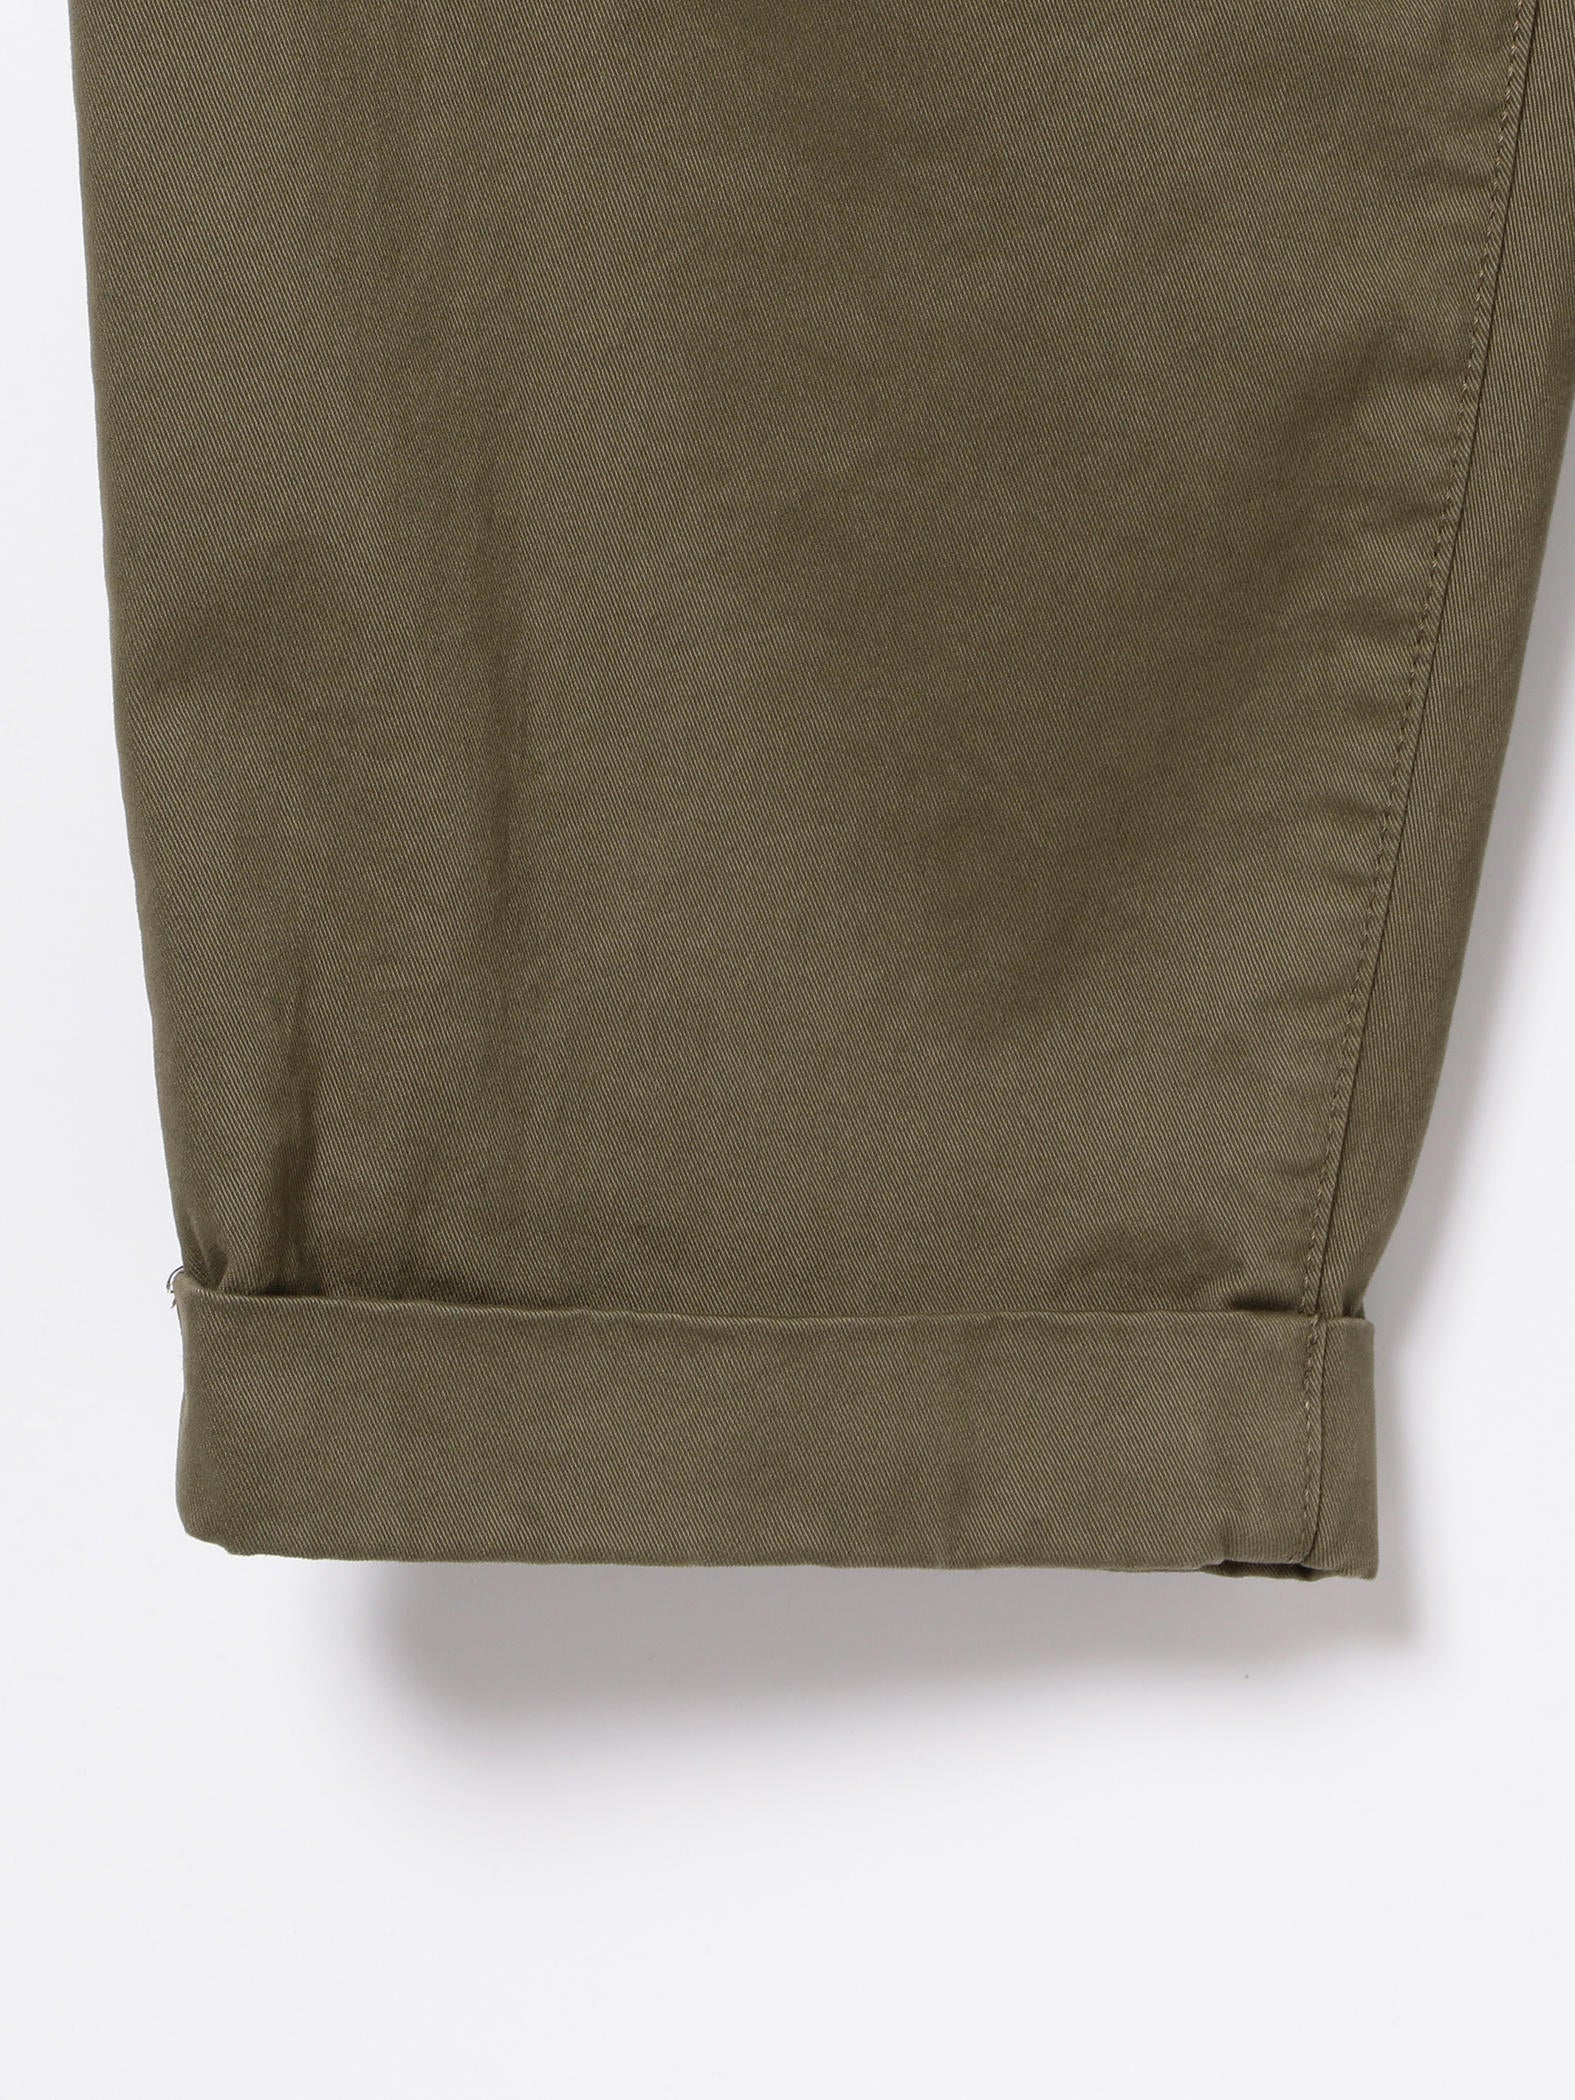 2 Pleat Twill Pant in Olive